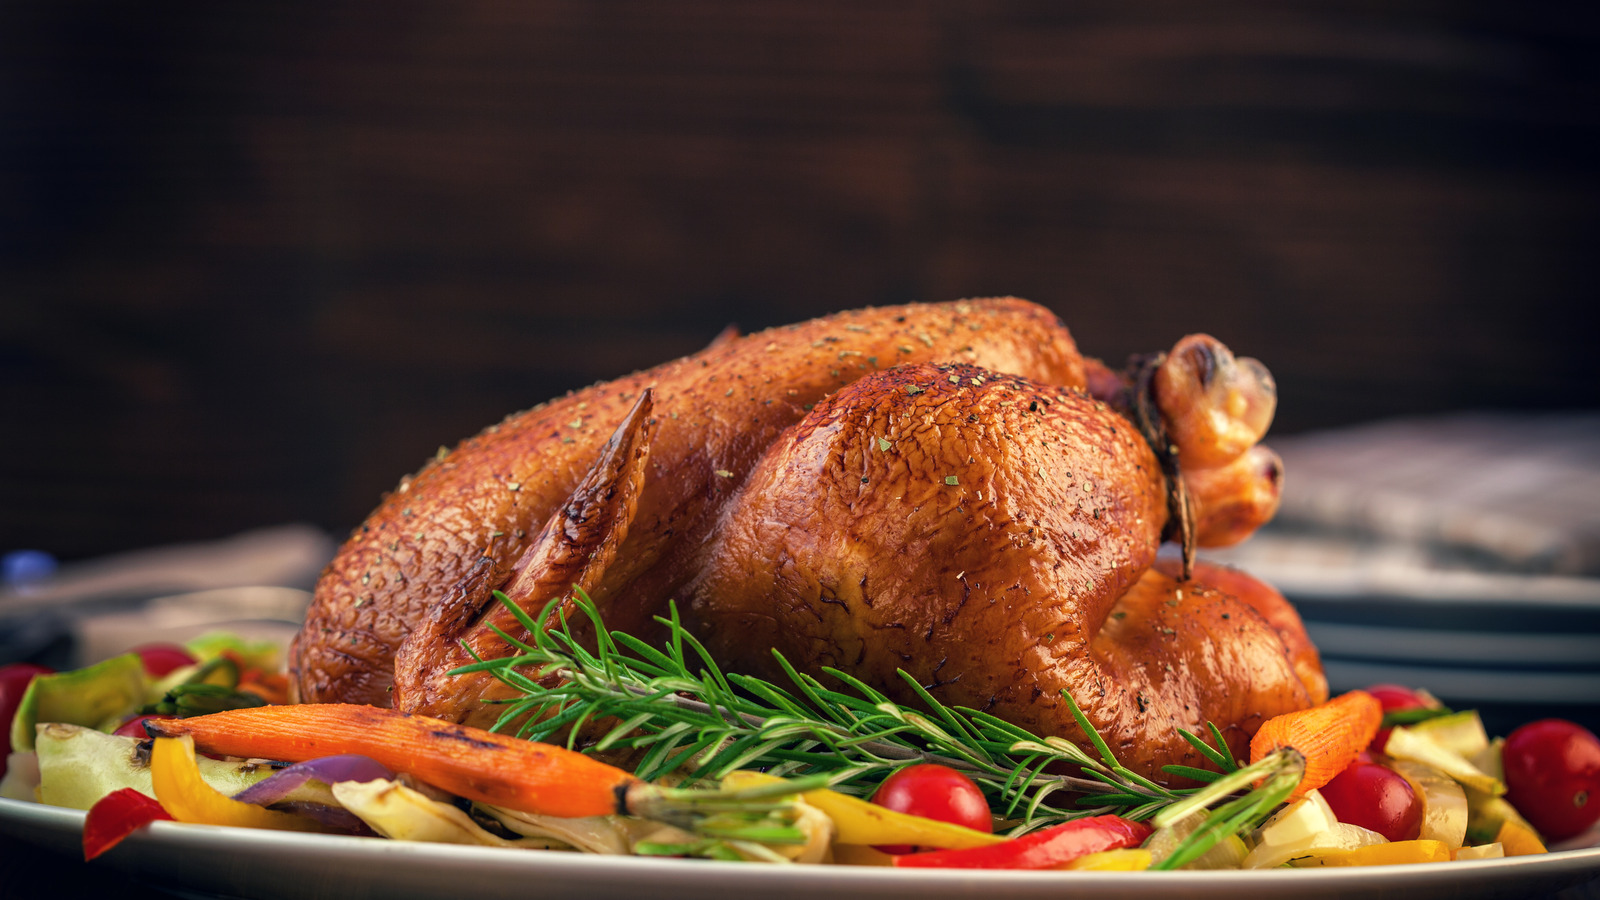 For Thanksgiving Turkey, Pop Up Timer Brand is a Key Ingredient